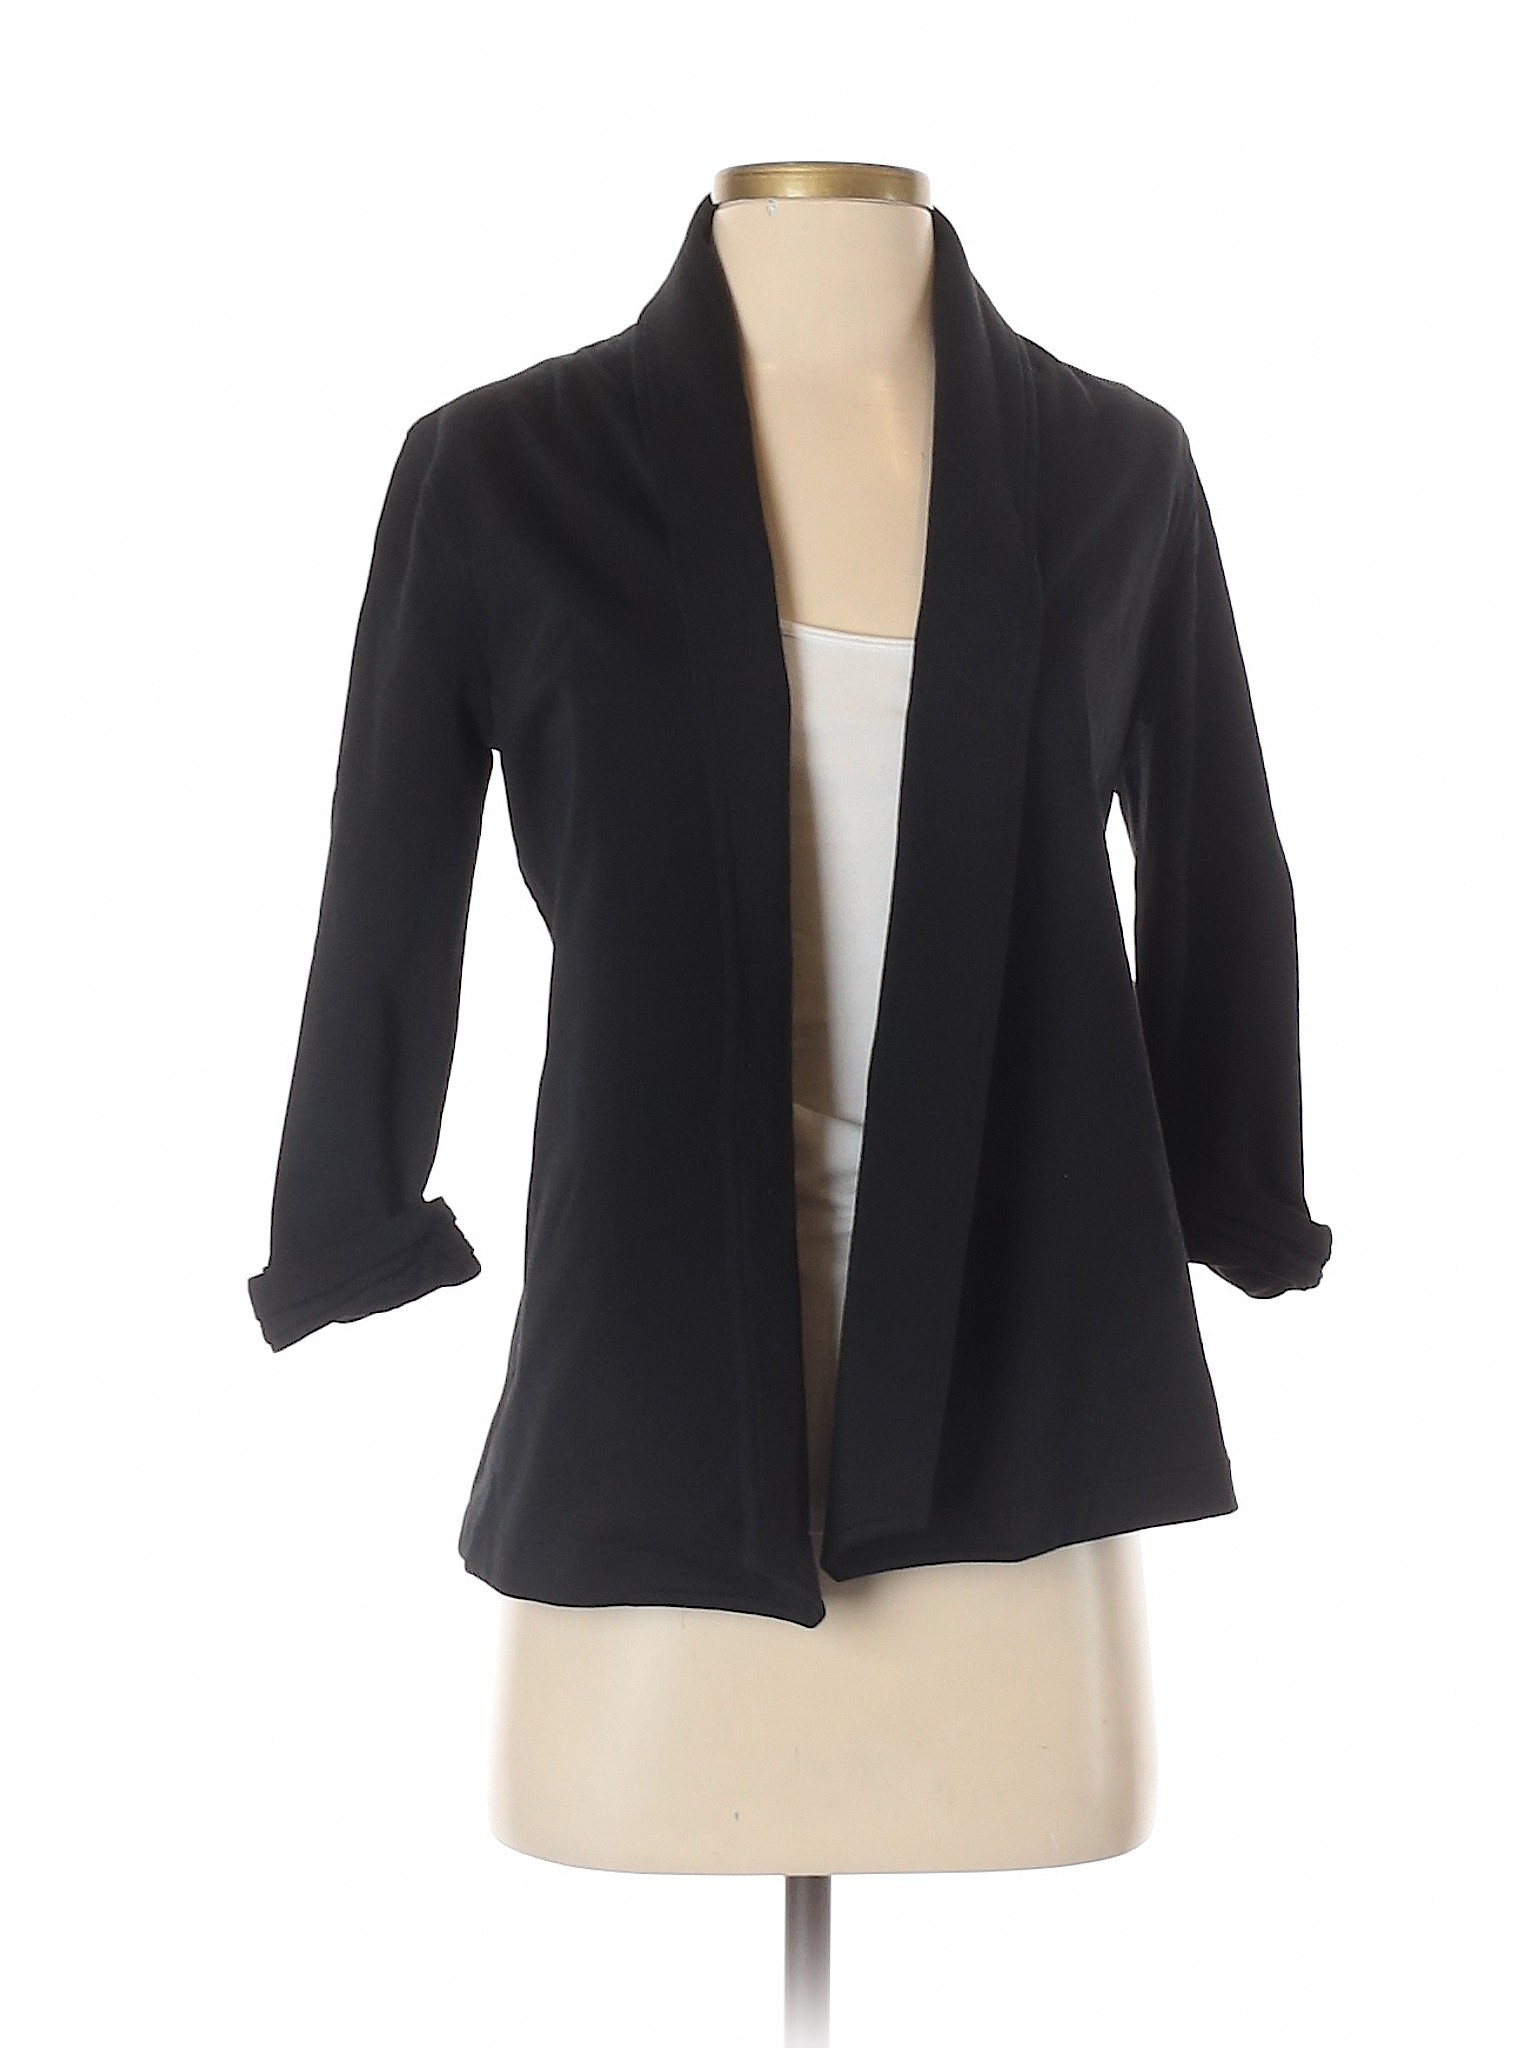 Details about Theory Women Black Cardigan P Tall